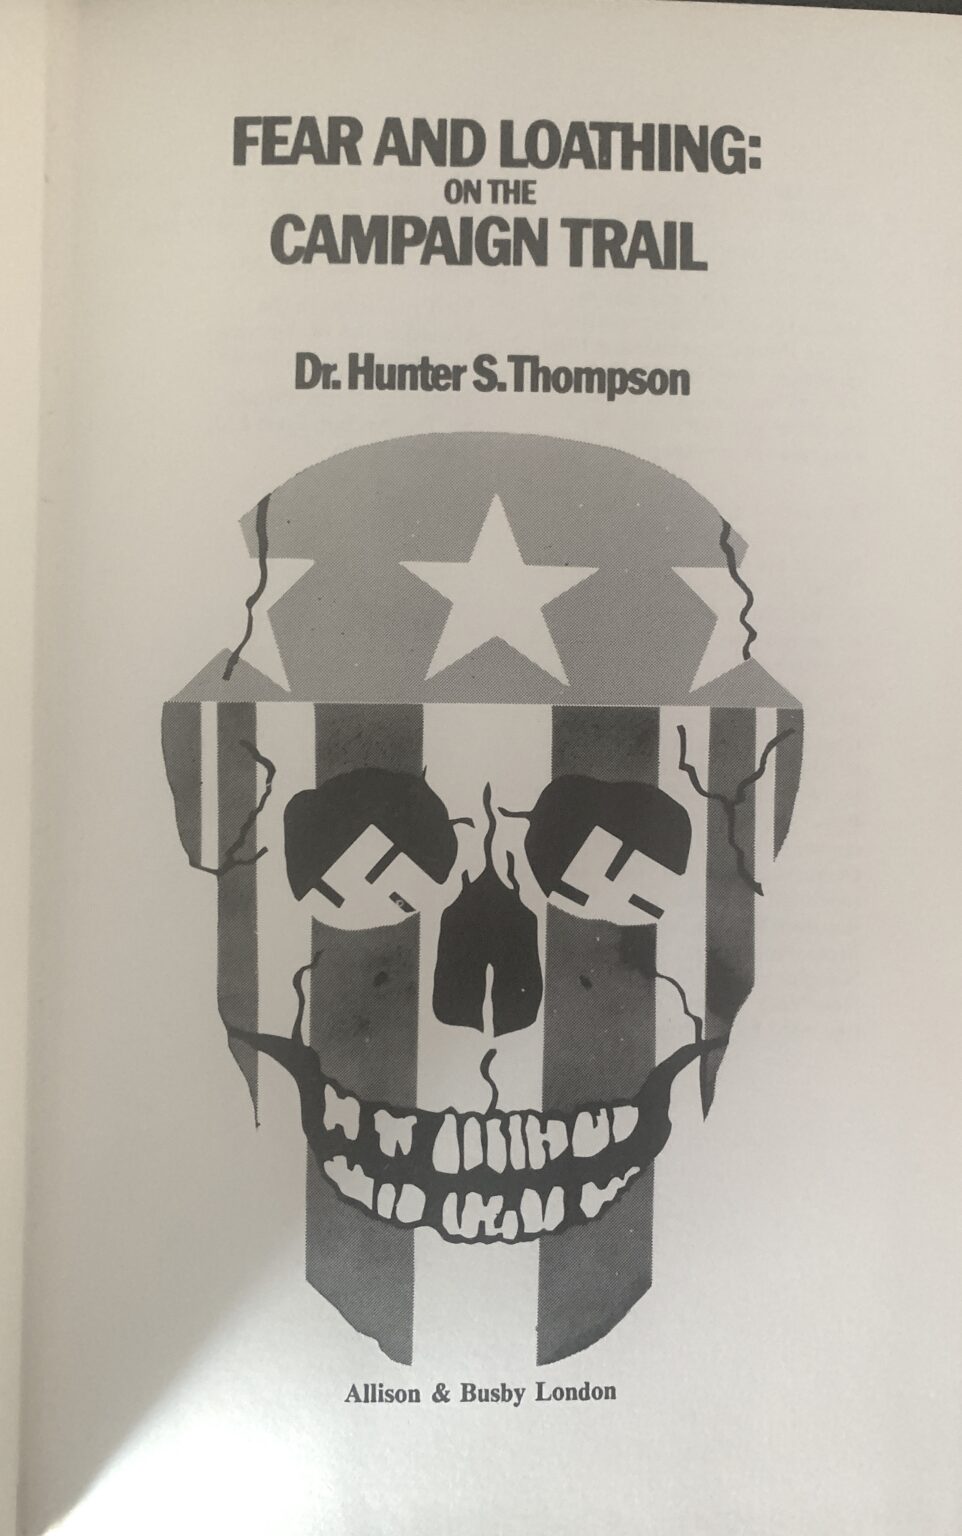 hunter s thompson fear and loathing on the campaign trail